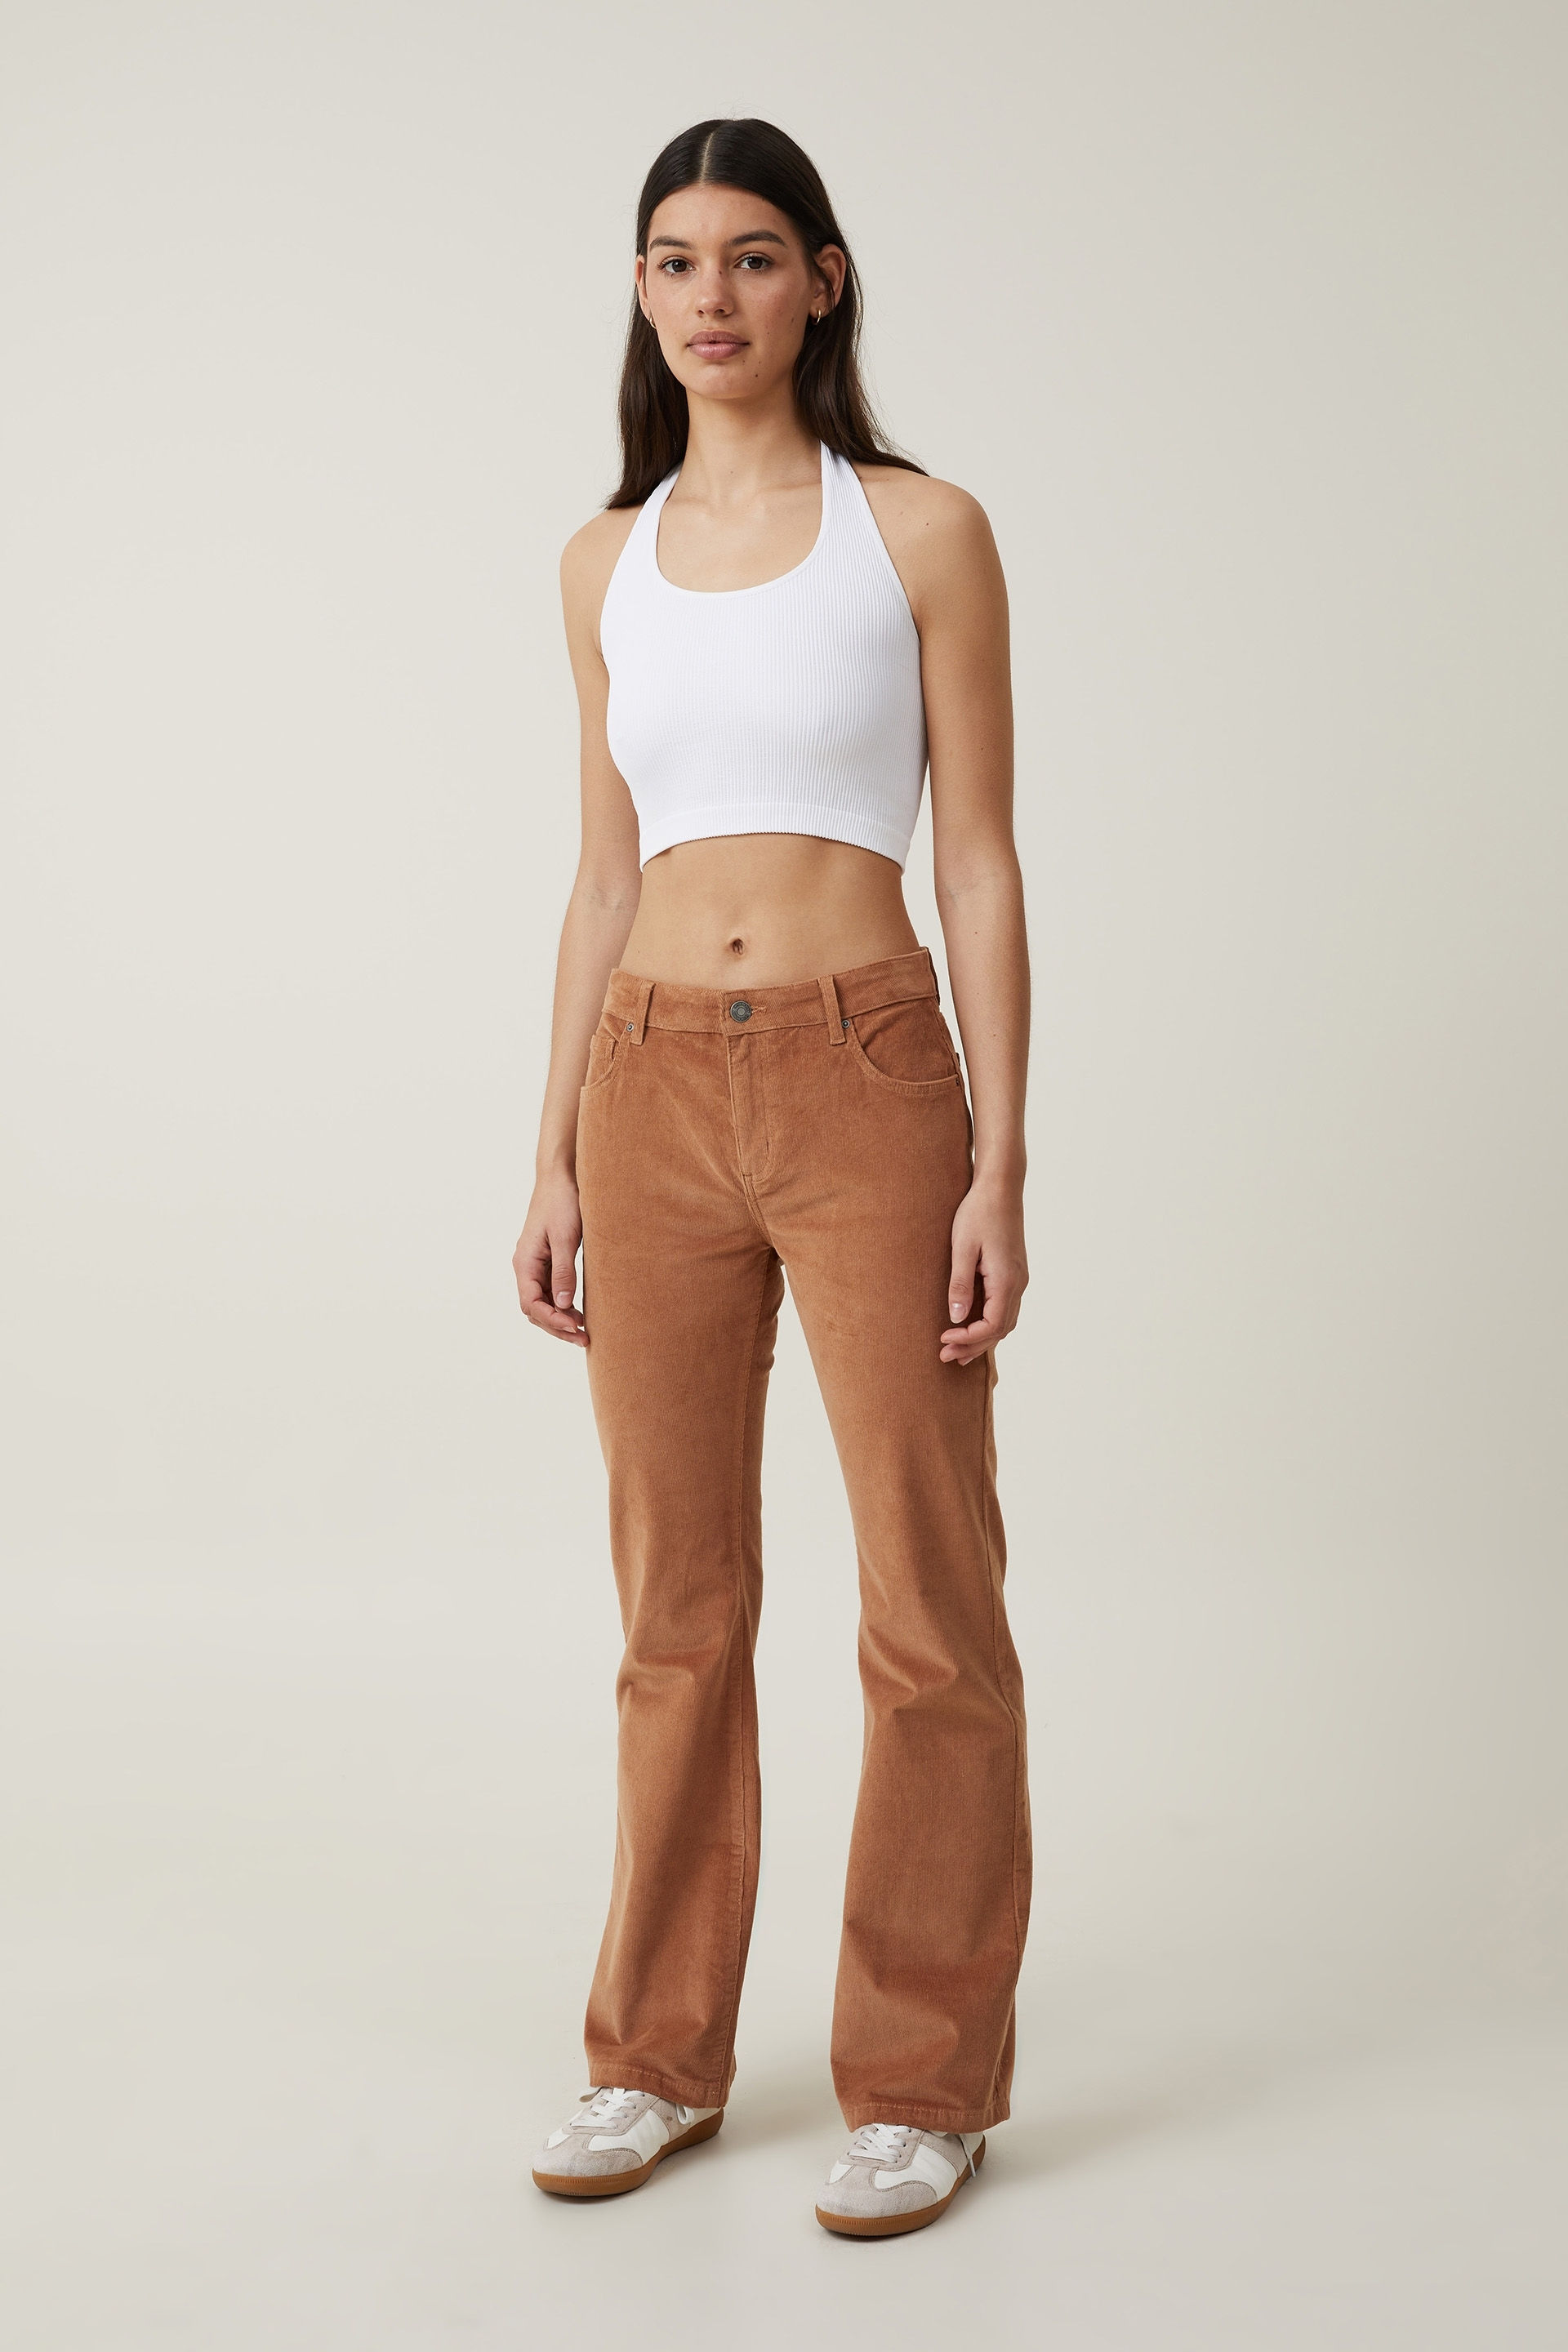 Cotton On Women - Cord Stretch Bootcut Flare Jean - Pinecone